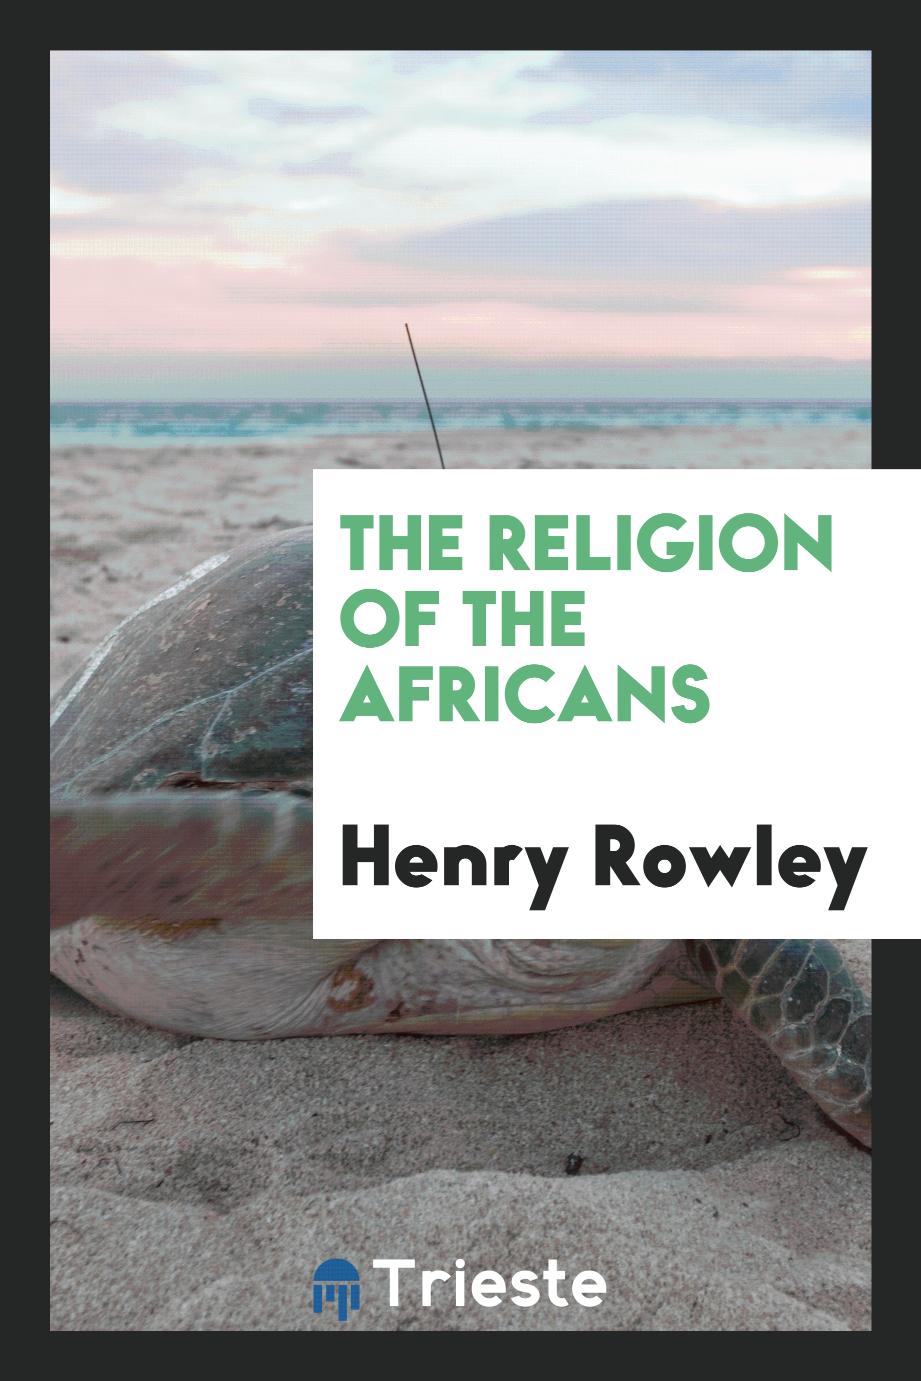 The religion of the Africans